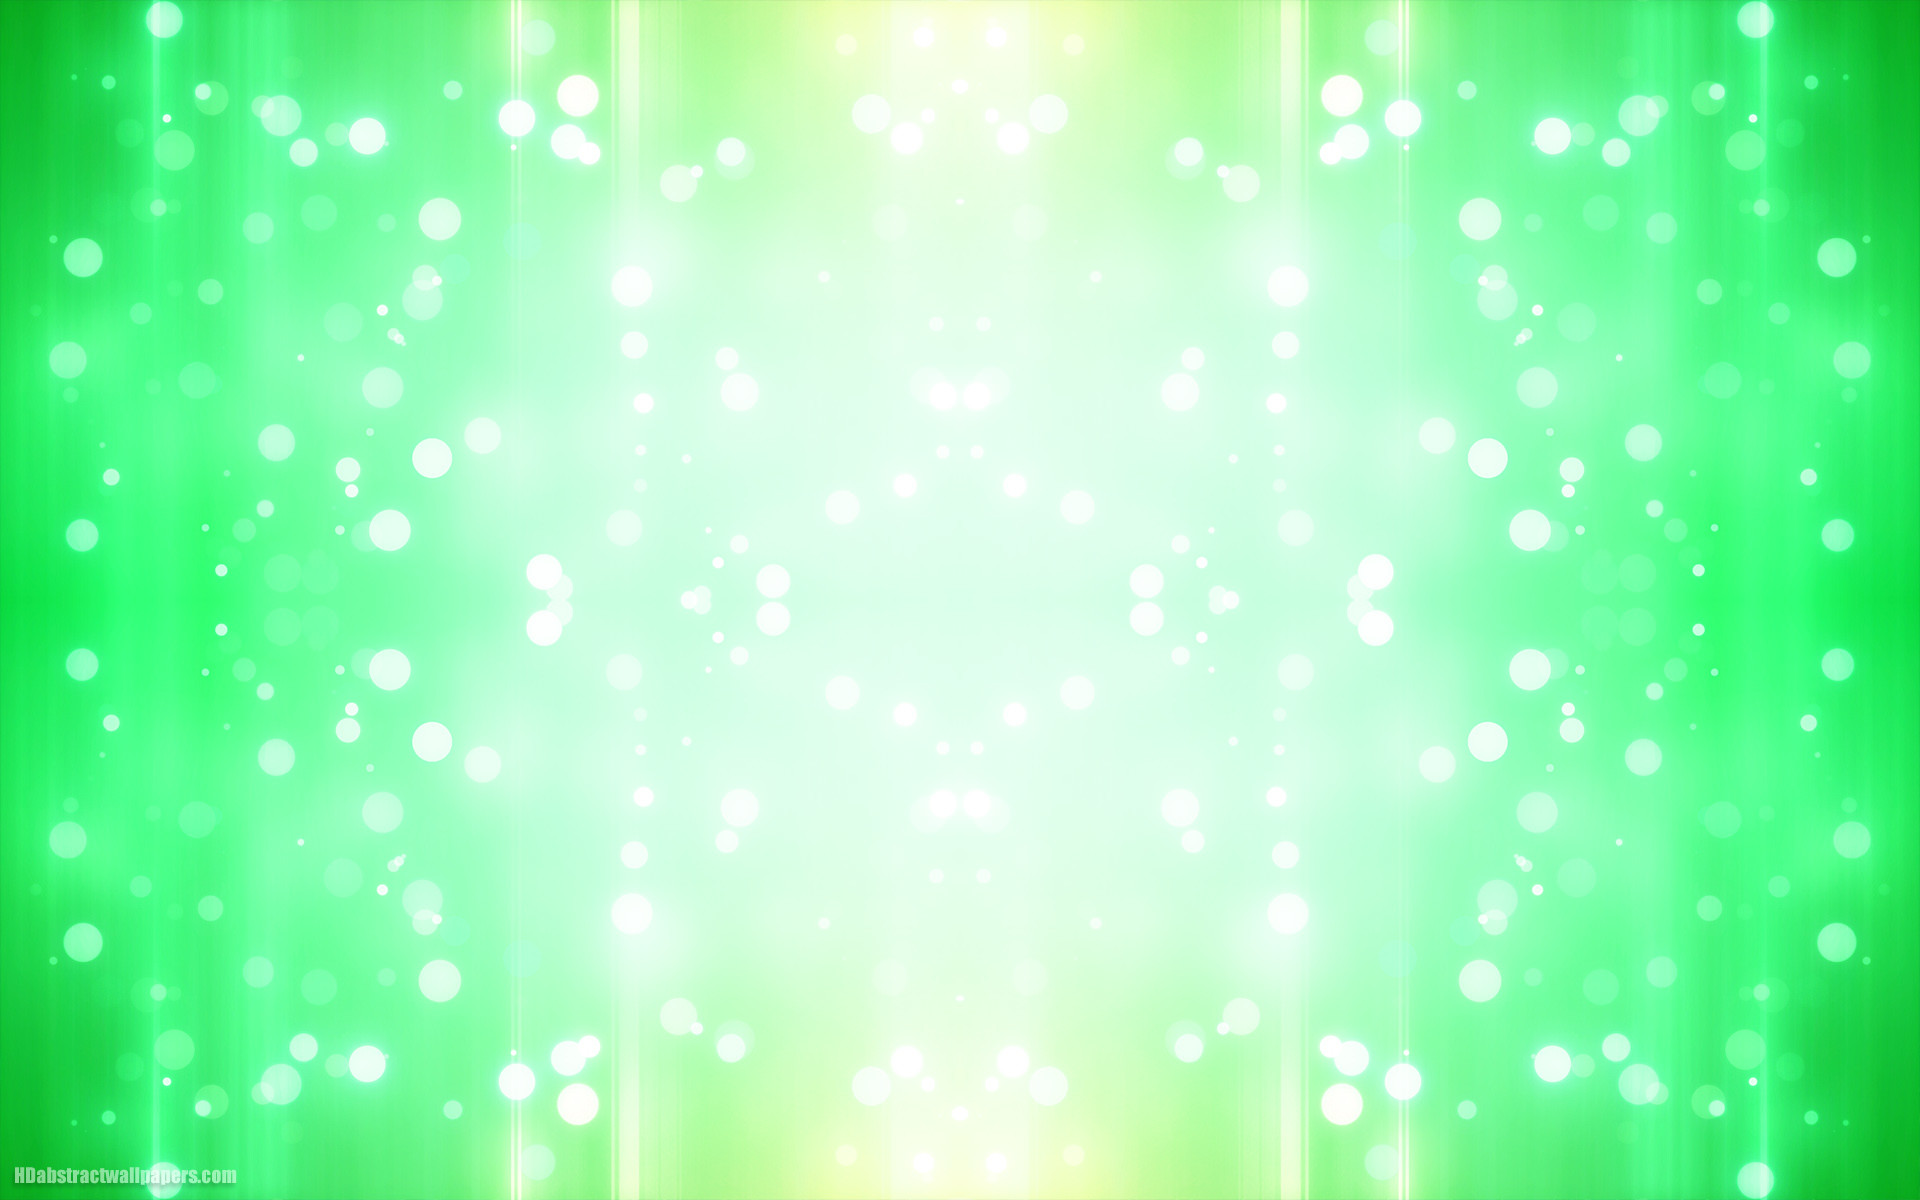 1920x1200 Green abstract background with bright lights